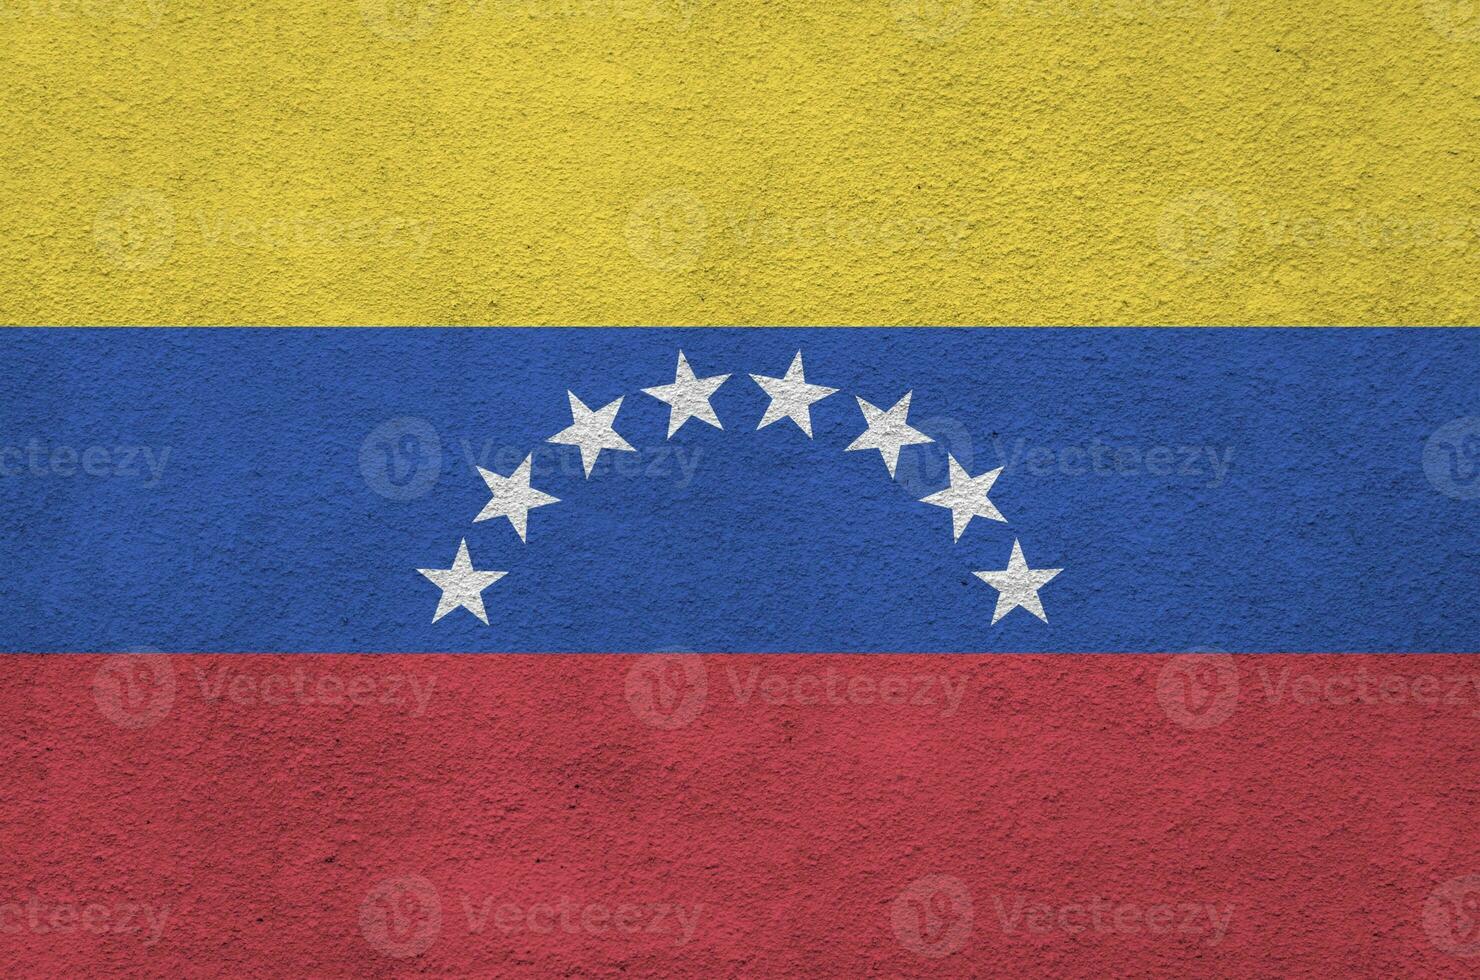 Venezuela flag depicted in bright paint colors on old relief plastering wall. Textured banner on rough background photo